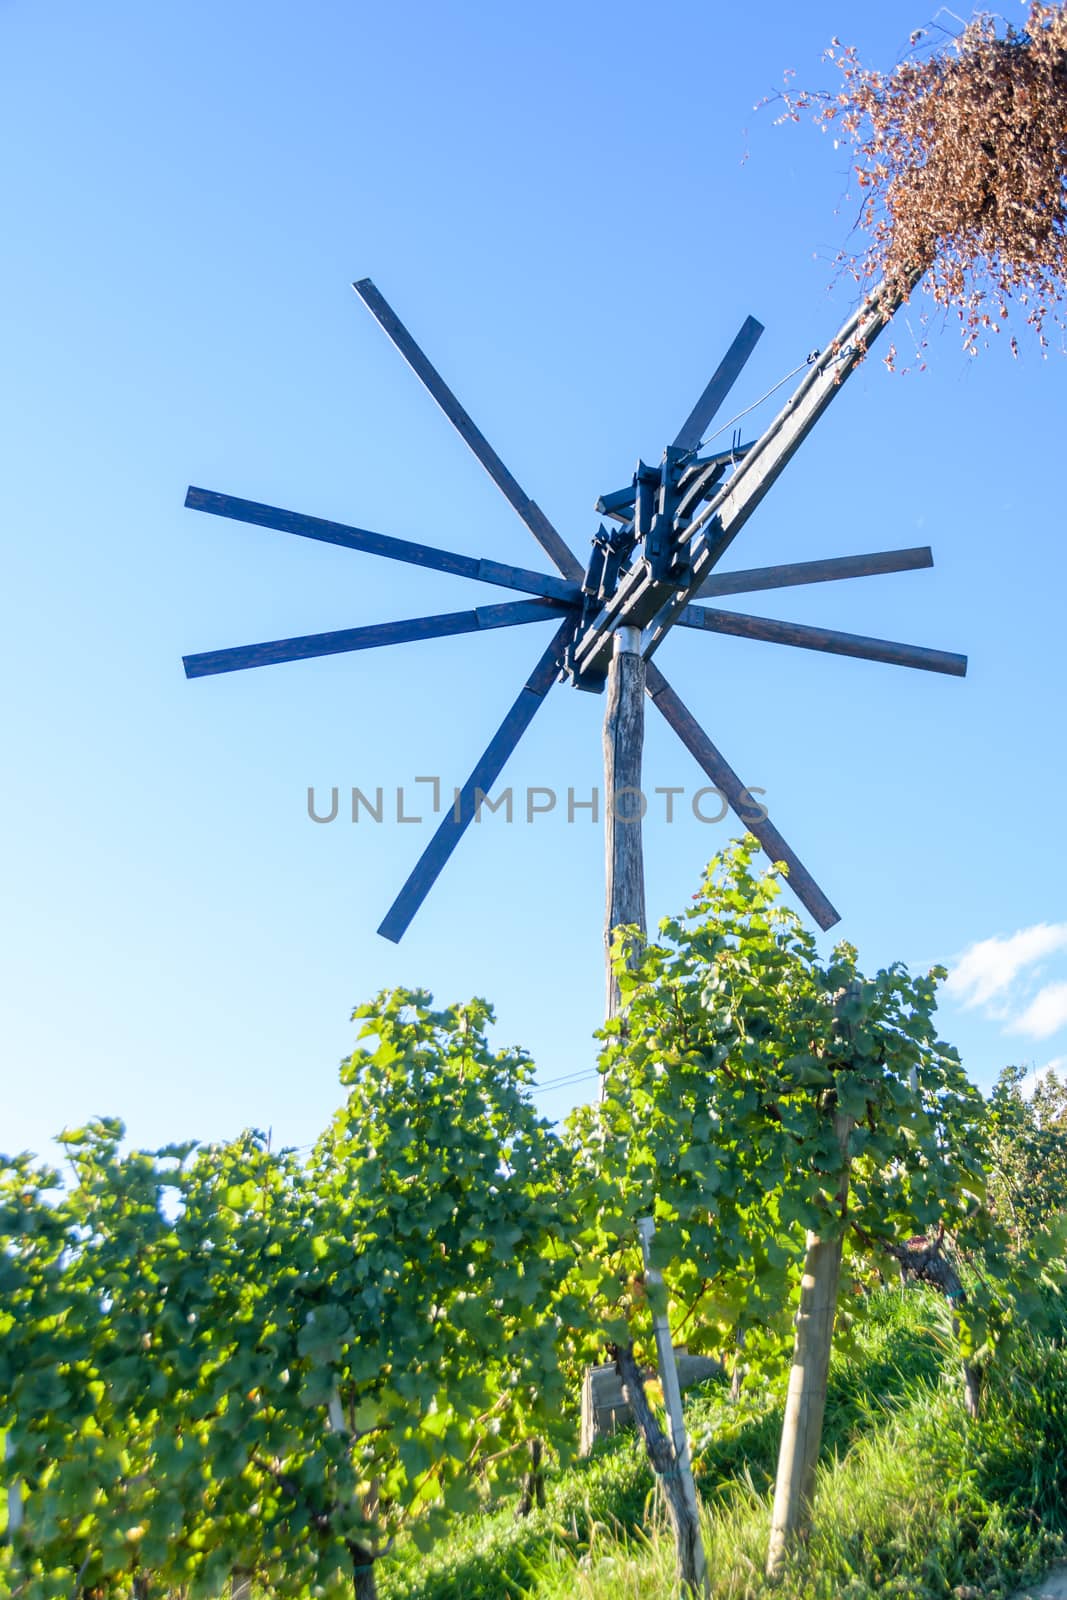 Klopotec, authentic traditional windmill in Slovenia found in vineyards to scare off birds, wine road and local attraction unique to Slovenia